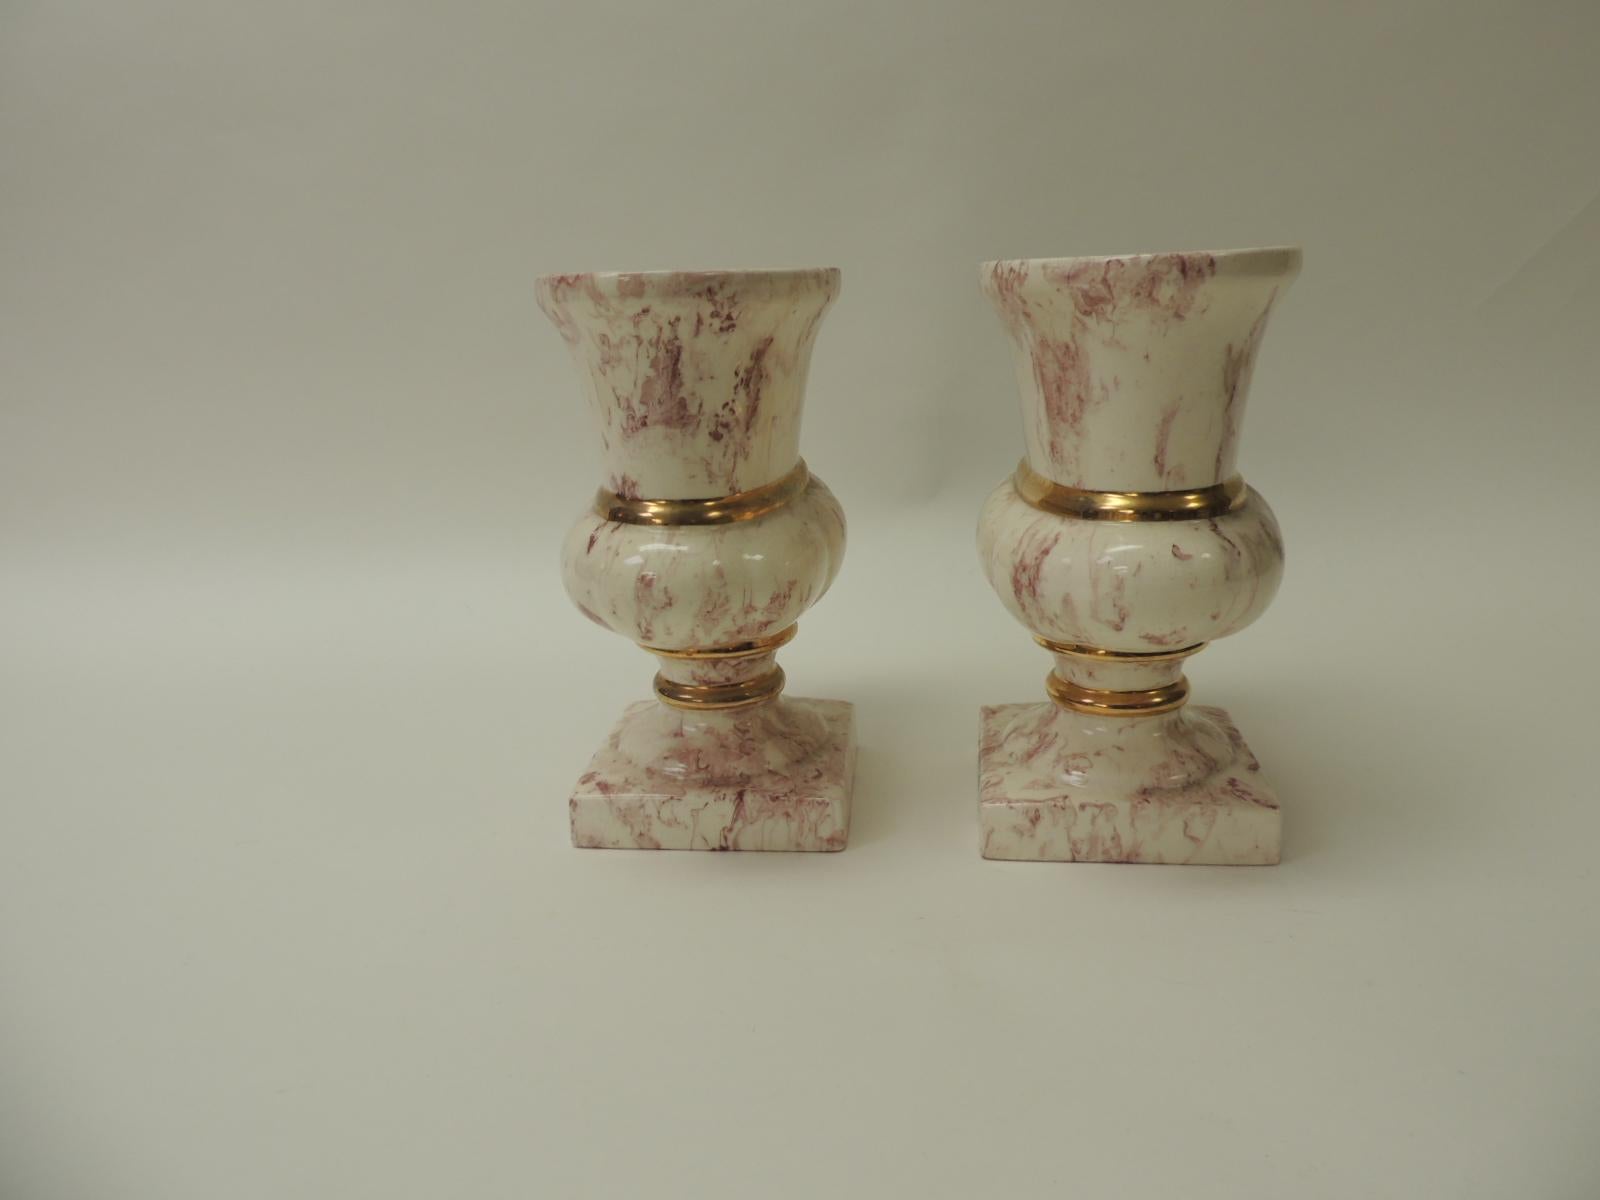 Pair of oval faux marbleize vintage pink vases or urns.
Dedicated vases with square footed base and gold leaf details.
Original label: The Bennetts.
Size: 4 x 4 x 8.5 x 4.5 x 7.5.

 